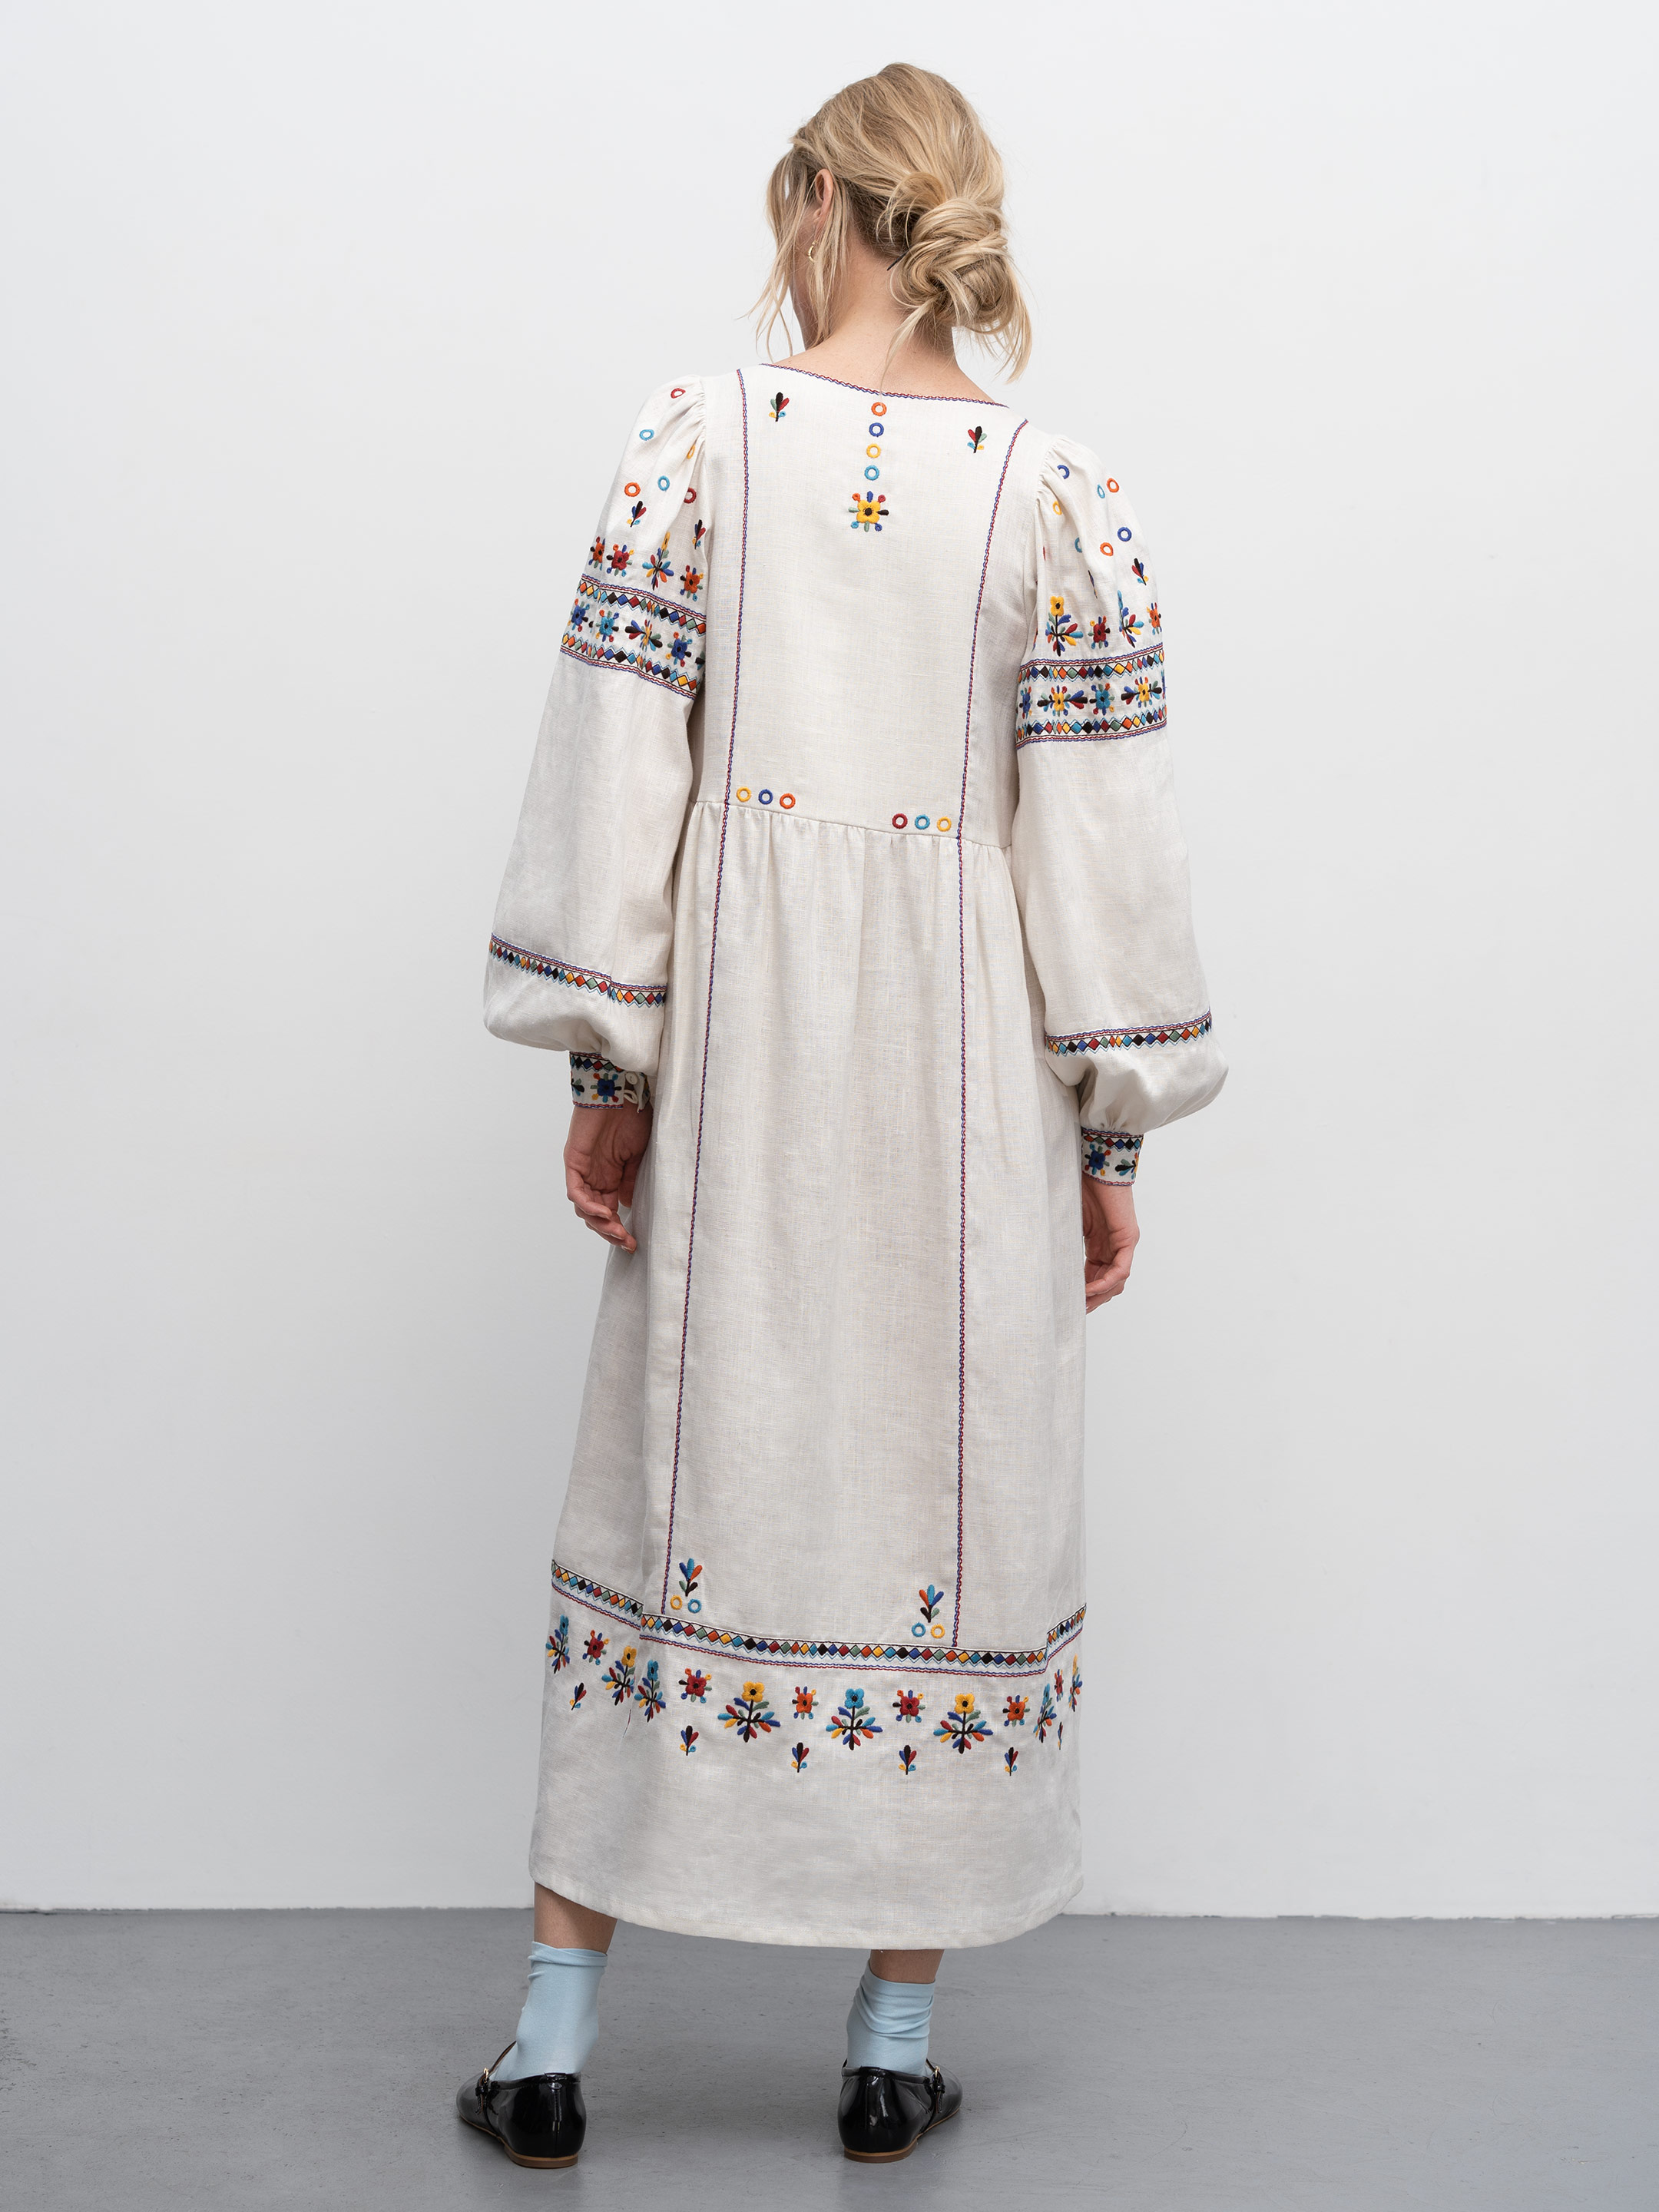 Long green linen dress Vasilina - Festive linen dress with lace and  embroidery.